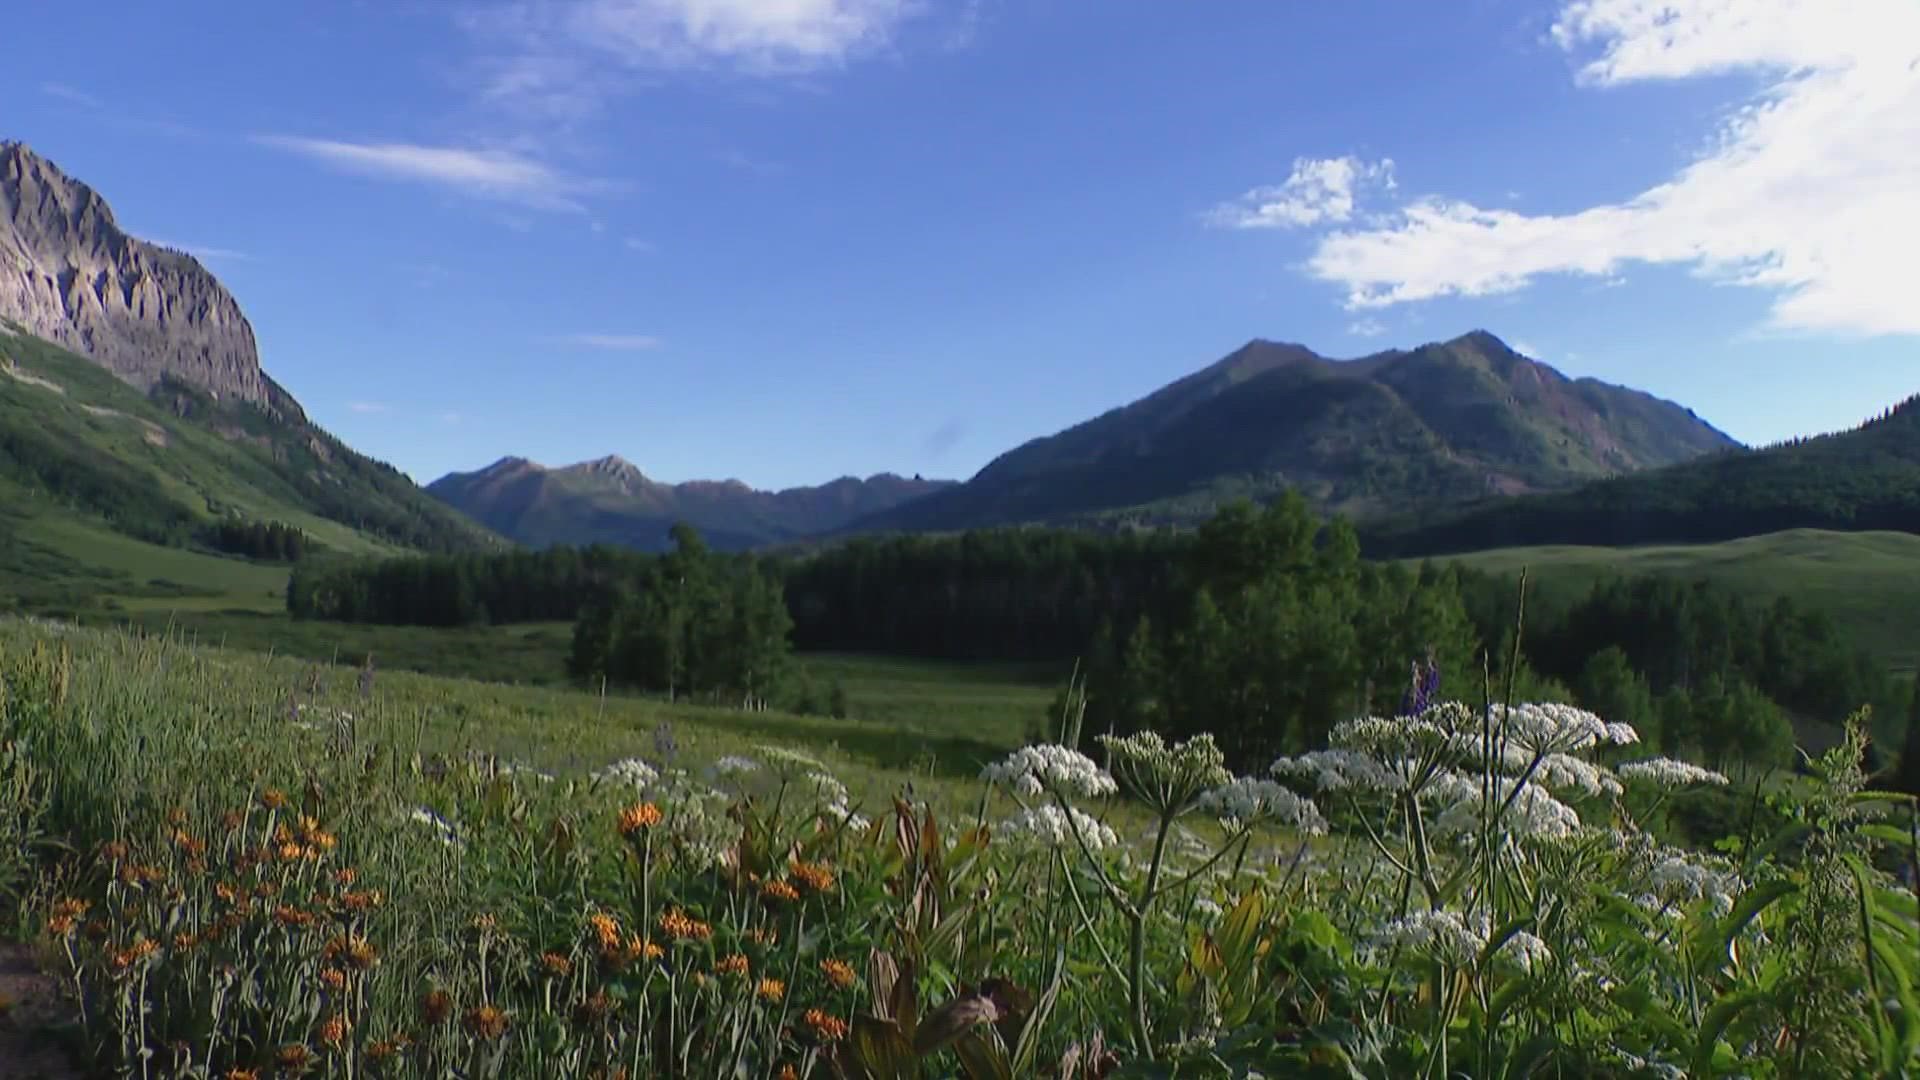 It's wildflower season in Colorado and there's nowhere better to see them than the area around Crested Butte. 9NEWS Anne Herbst takes us hiking.